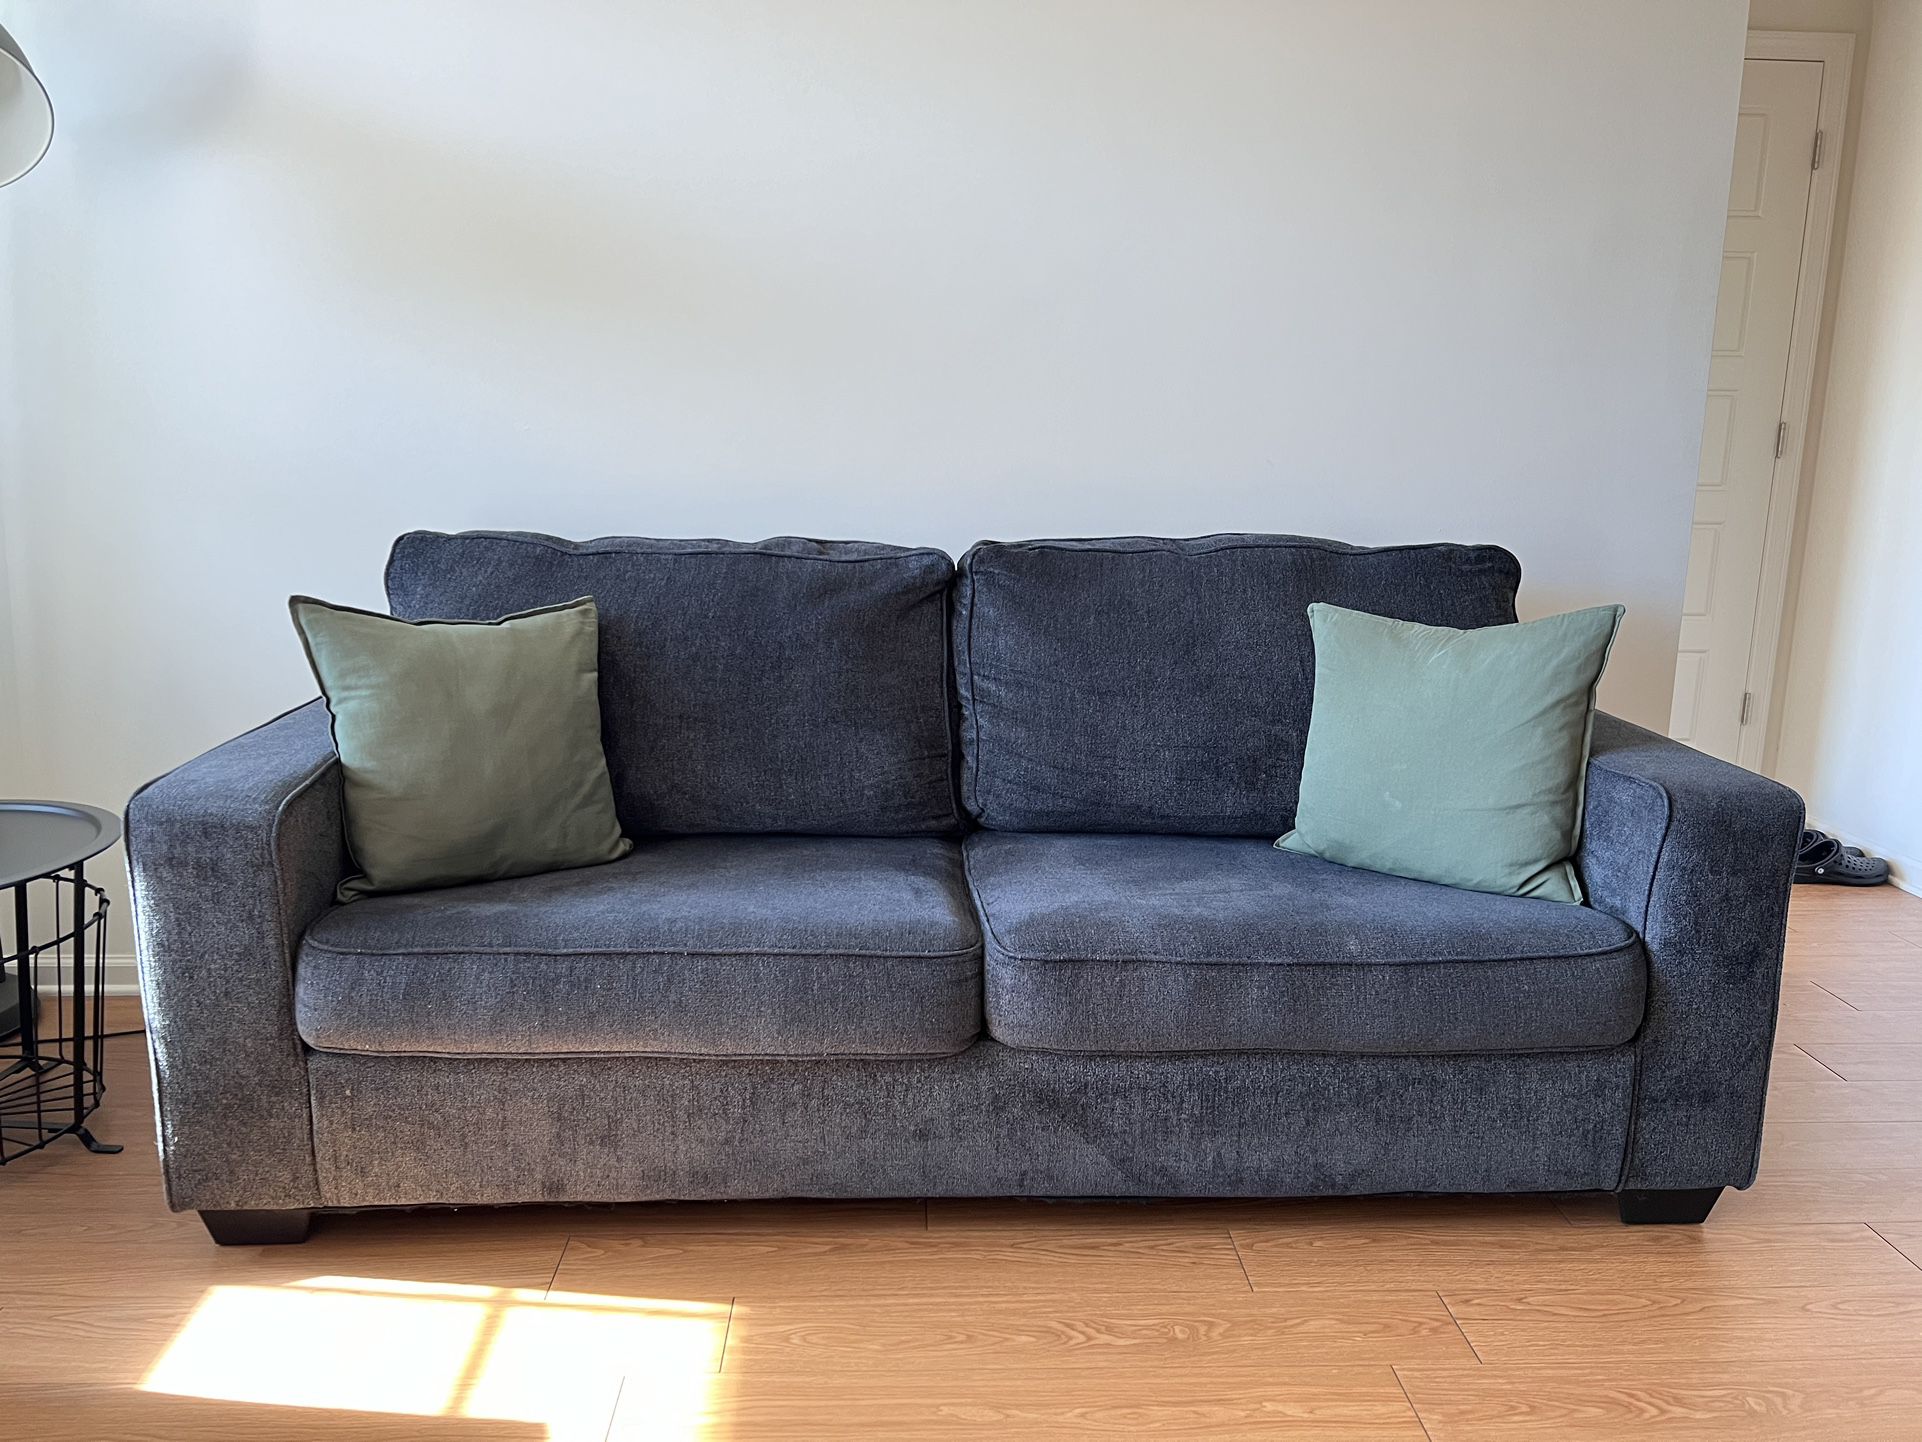 Ashely’s Furniture Couch Dark Gray